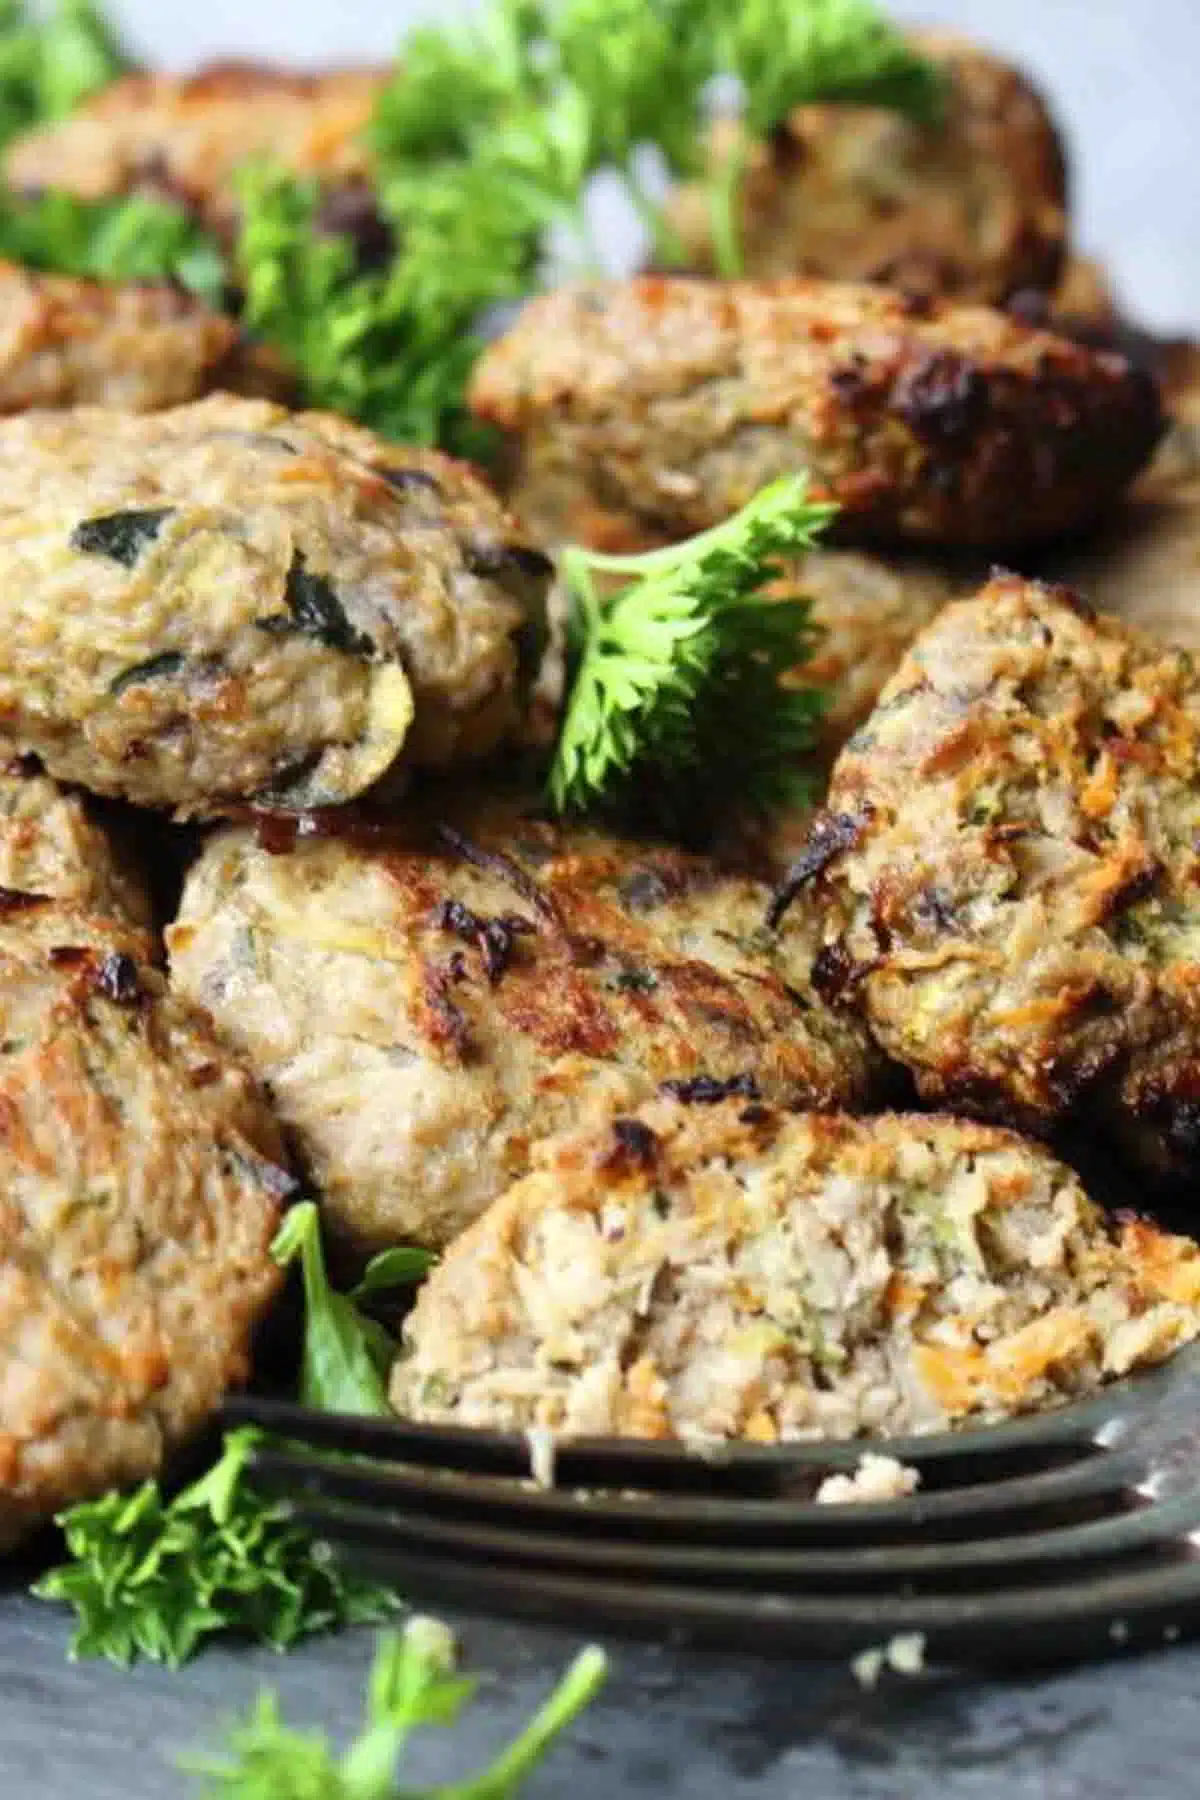 Low Carb Burger Bites with parsley